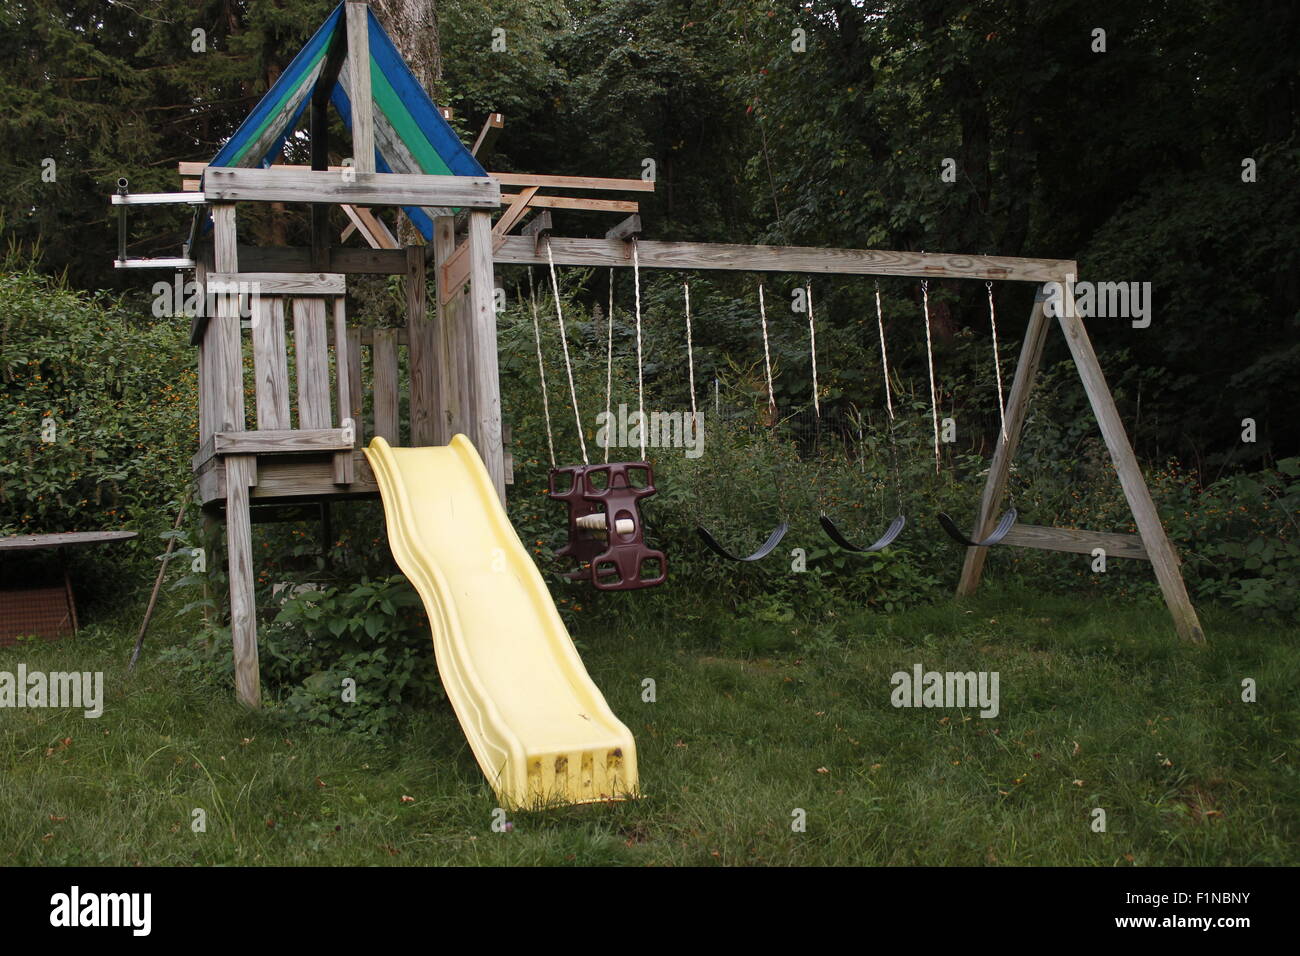 children's playscape at dusk with a yellow slide and swings Stock Photo